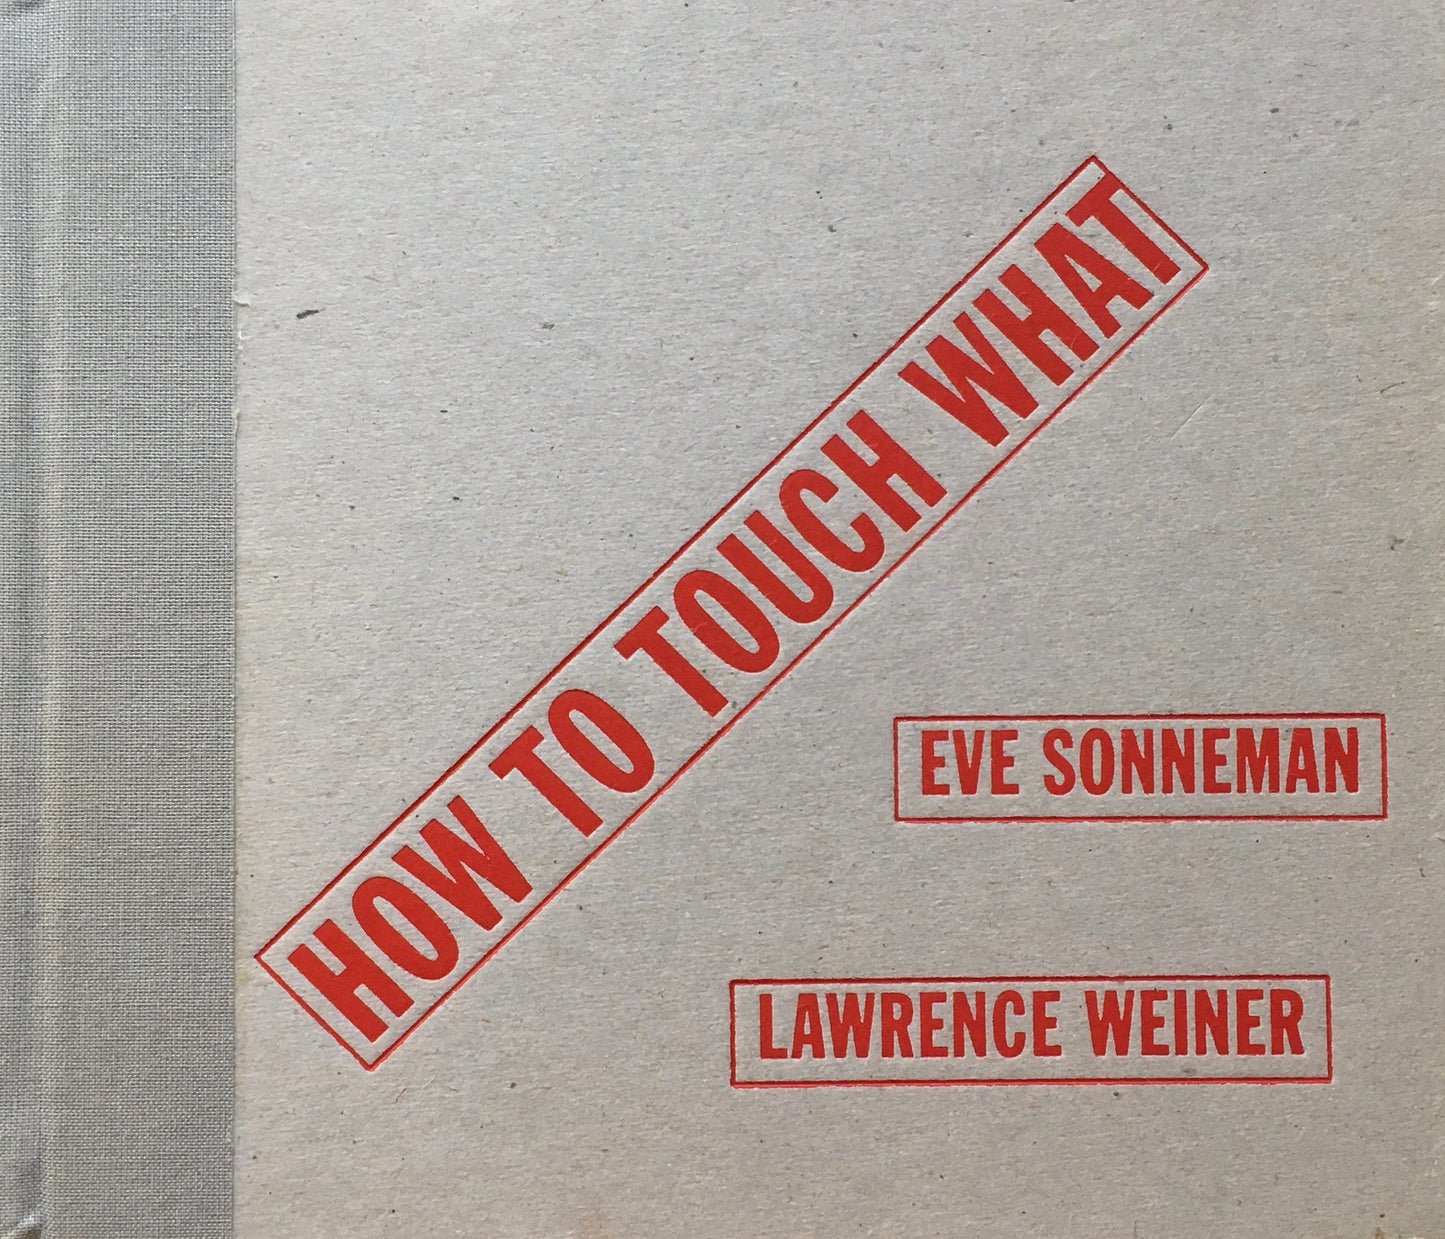 HOW TO TOUCH WHAT　EVE SONNEMAN　LAWRENCE WEINER